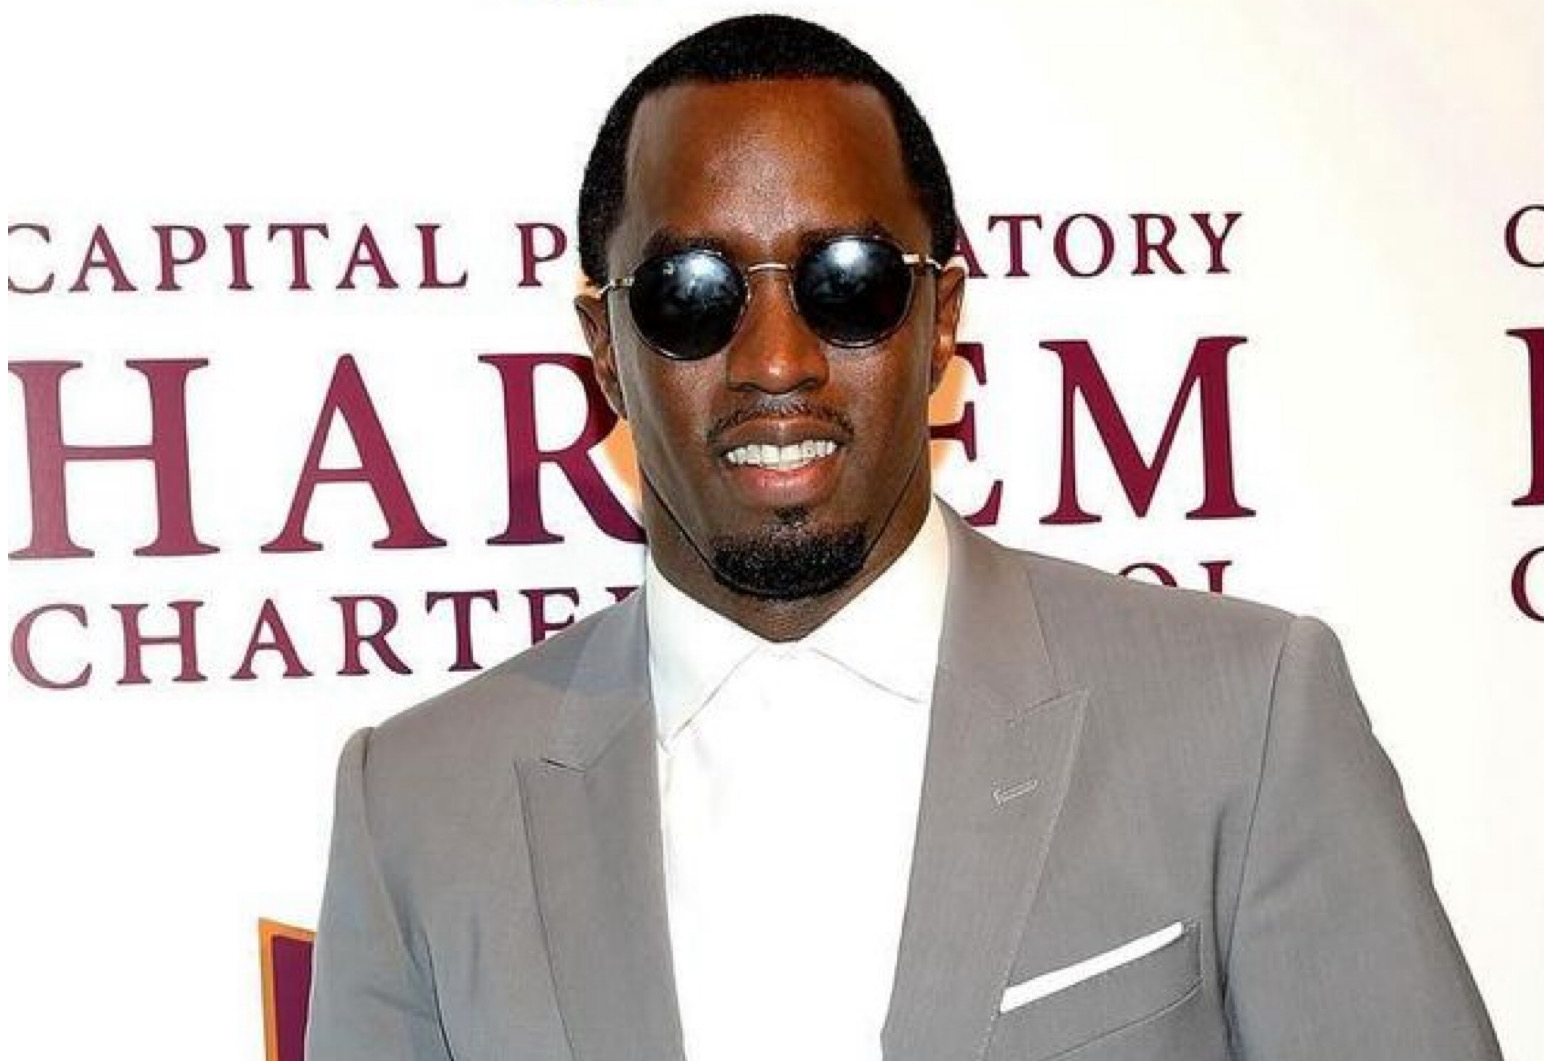 Capital preparatory charter schools announces the end of their partnership with Diddy amid s3xaul assault accusations